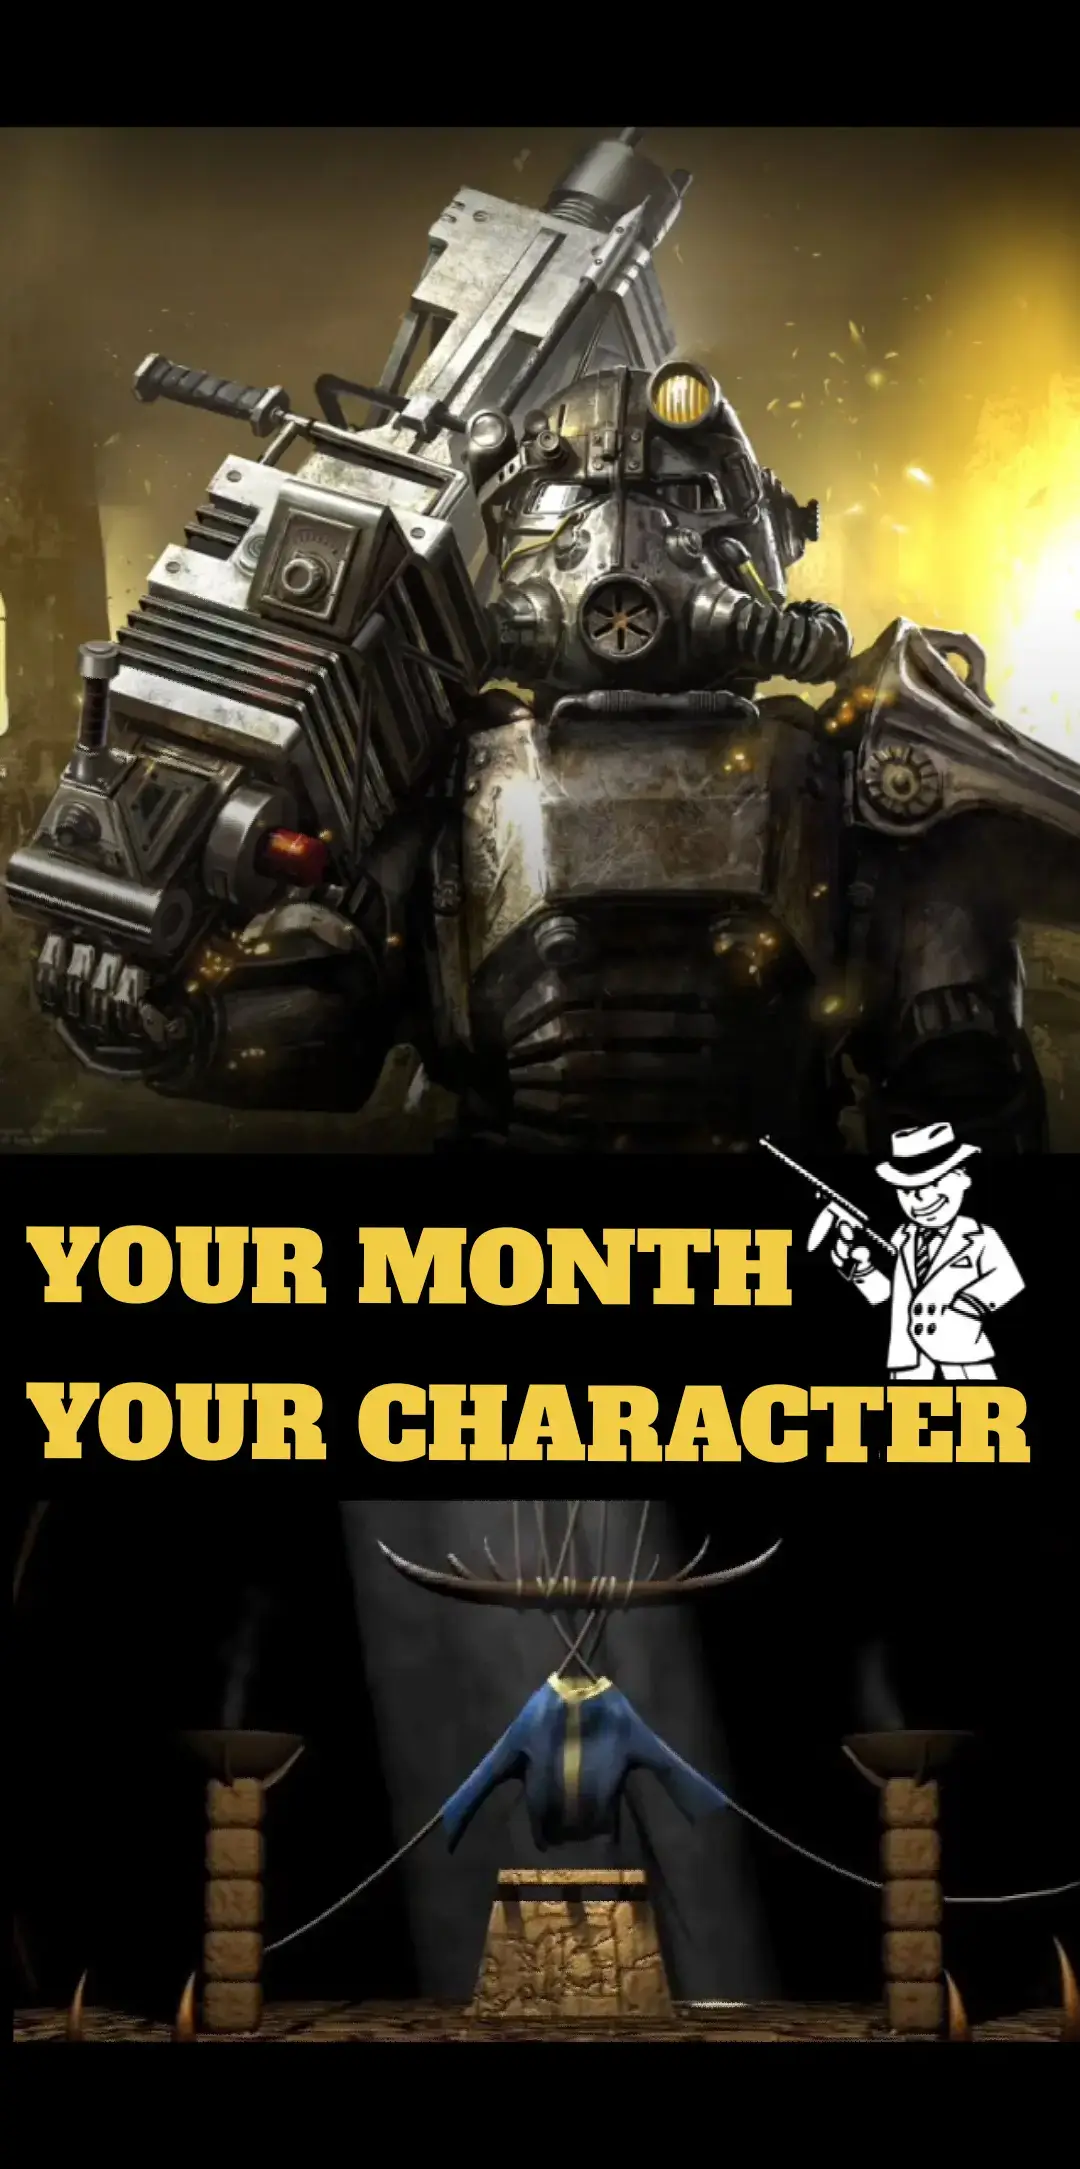 #fallout #fallout2 #fallout3 #falloutnewvegas #fallout4 #fallout76 #yourmonth #fyp 